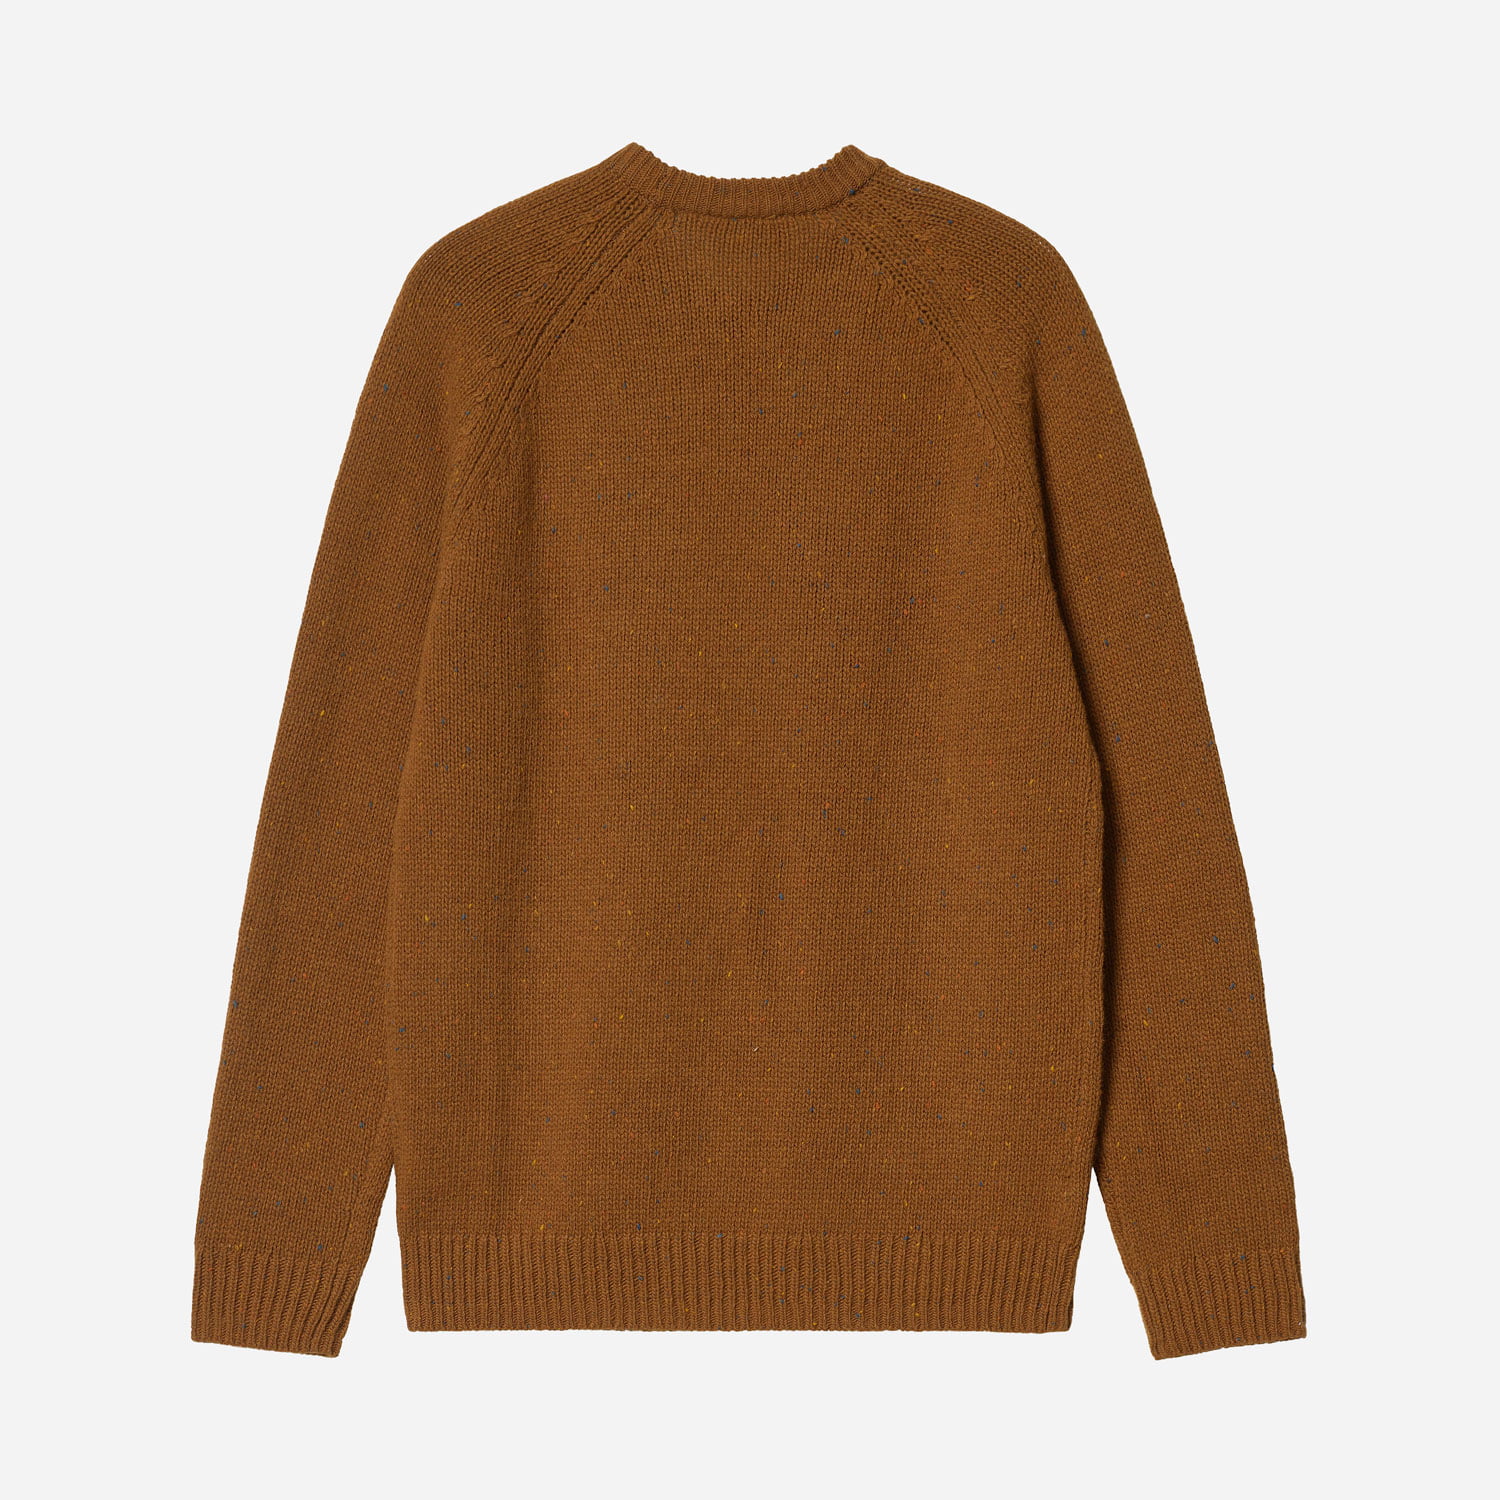 Carhartt Anglistic Sweat - Speckled Tawny